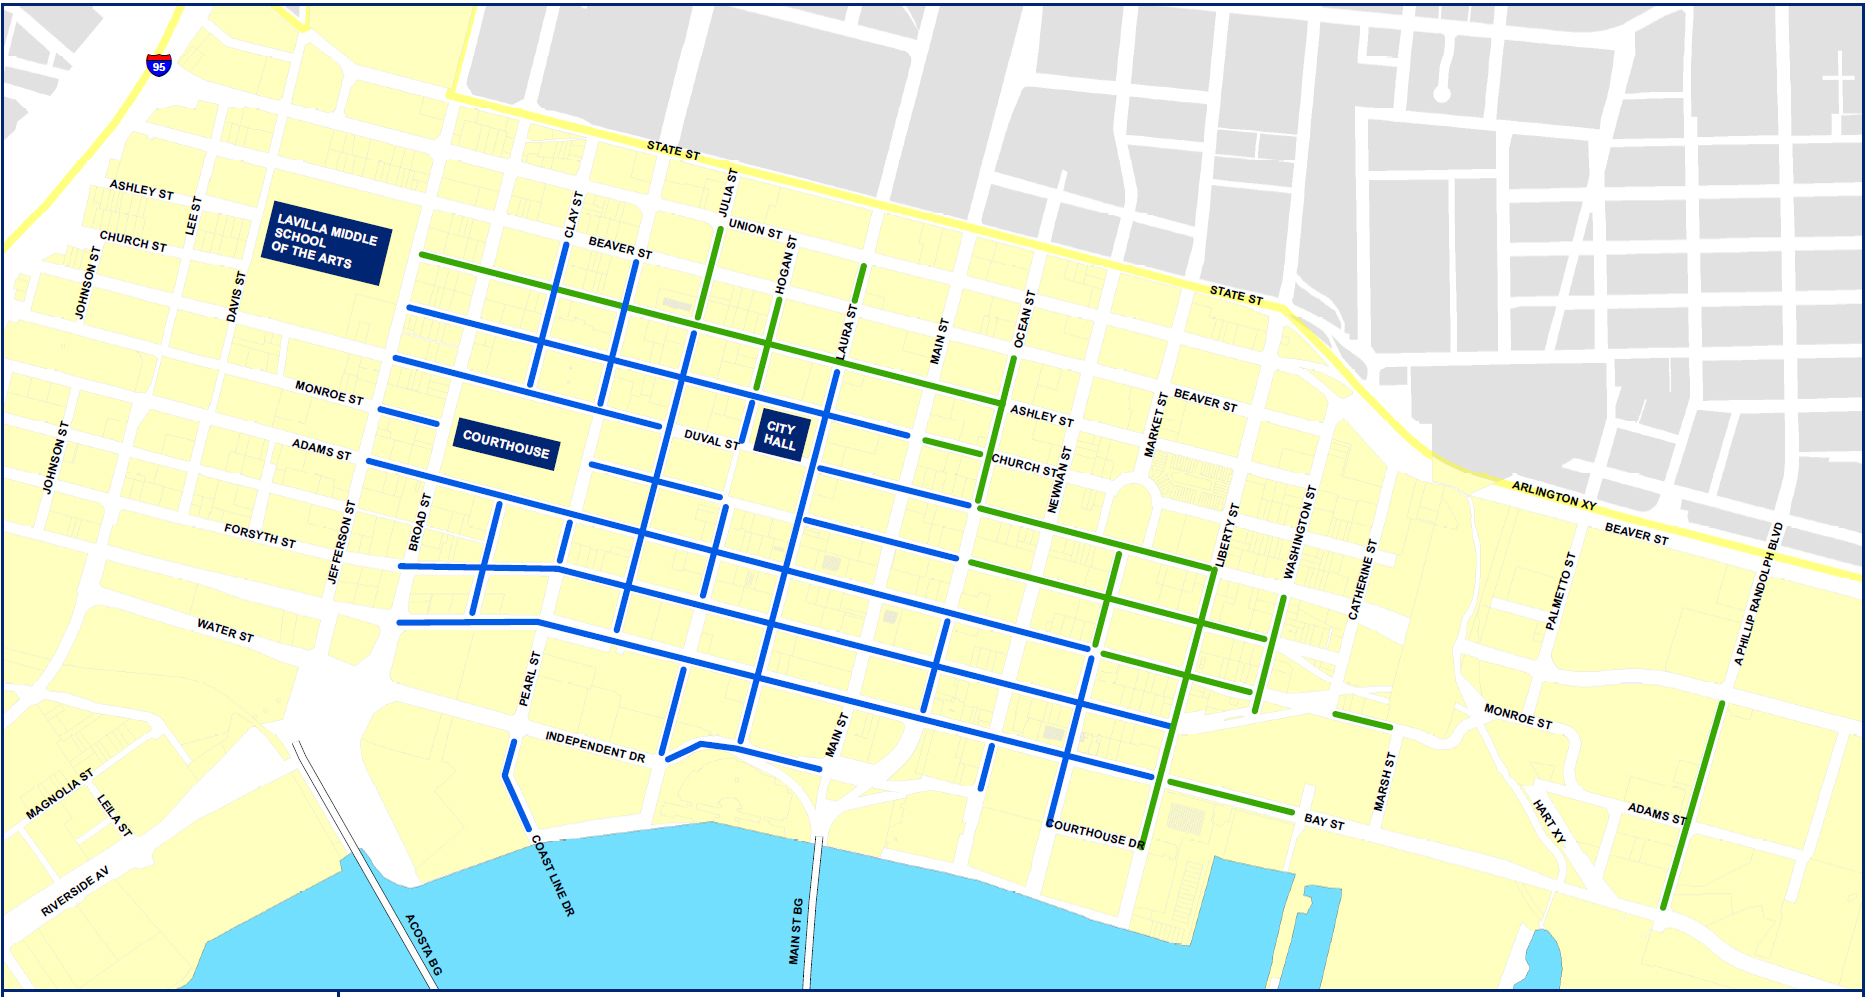 Parking rates will be going up at the high-demand areas marked in blue.